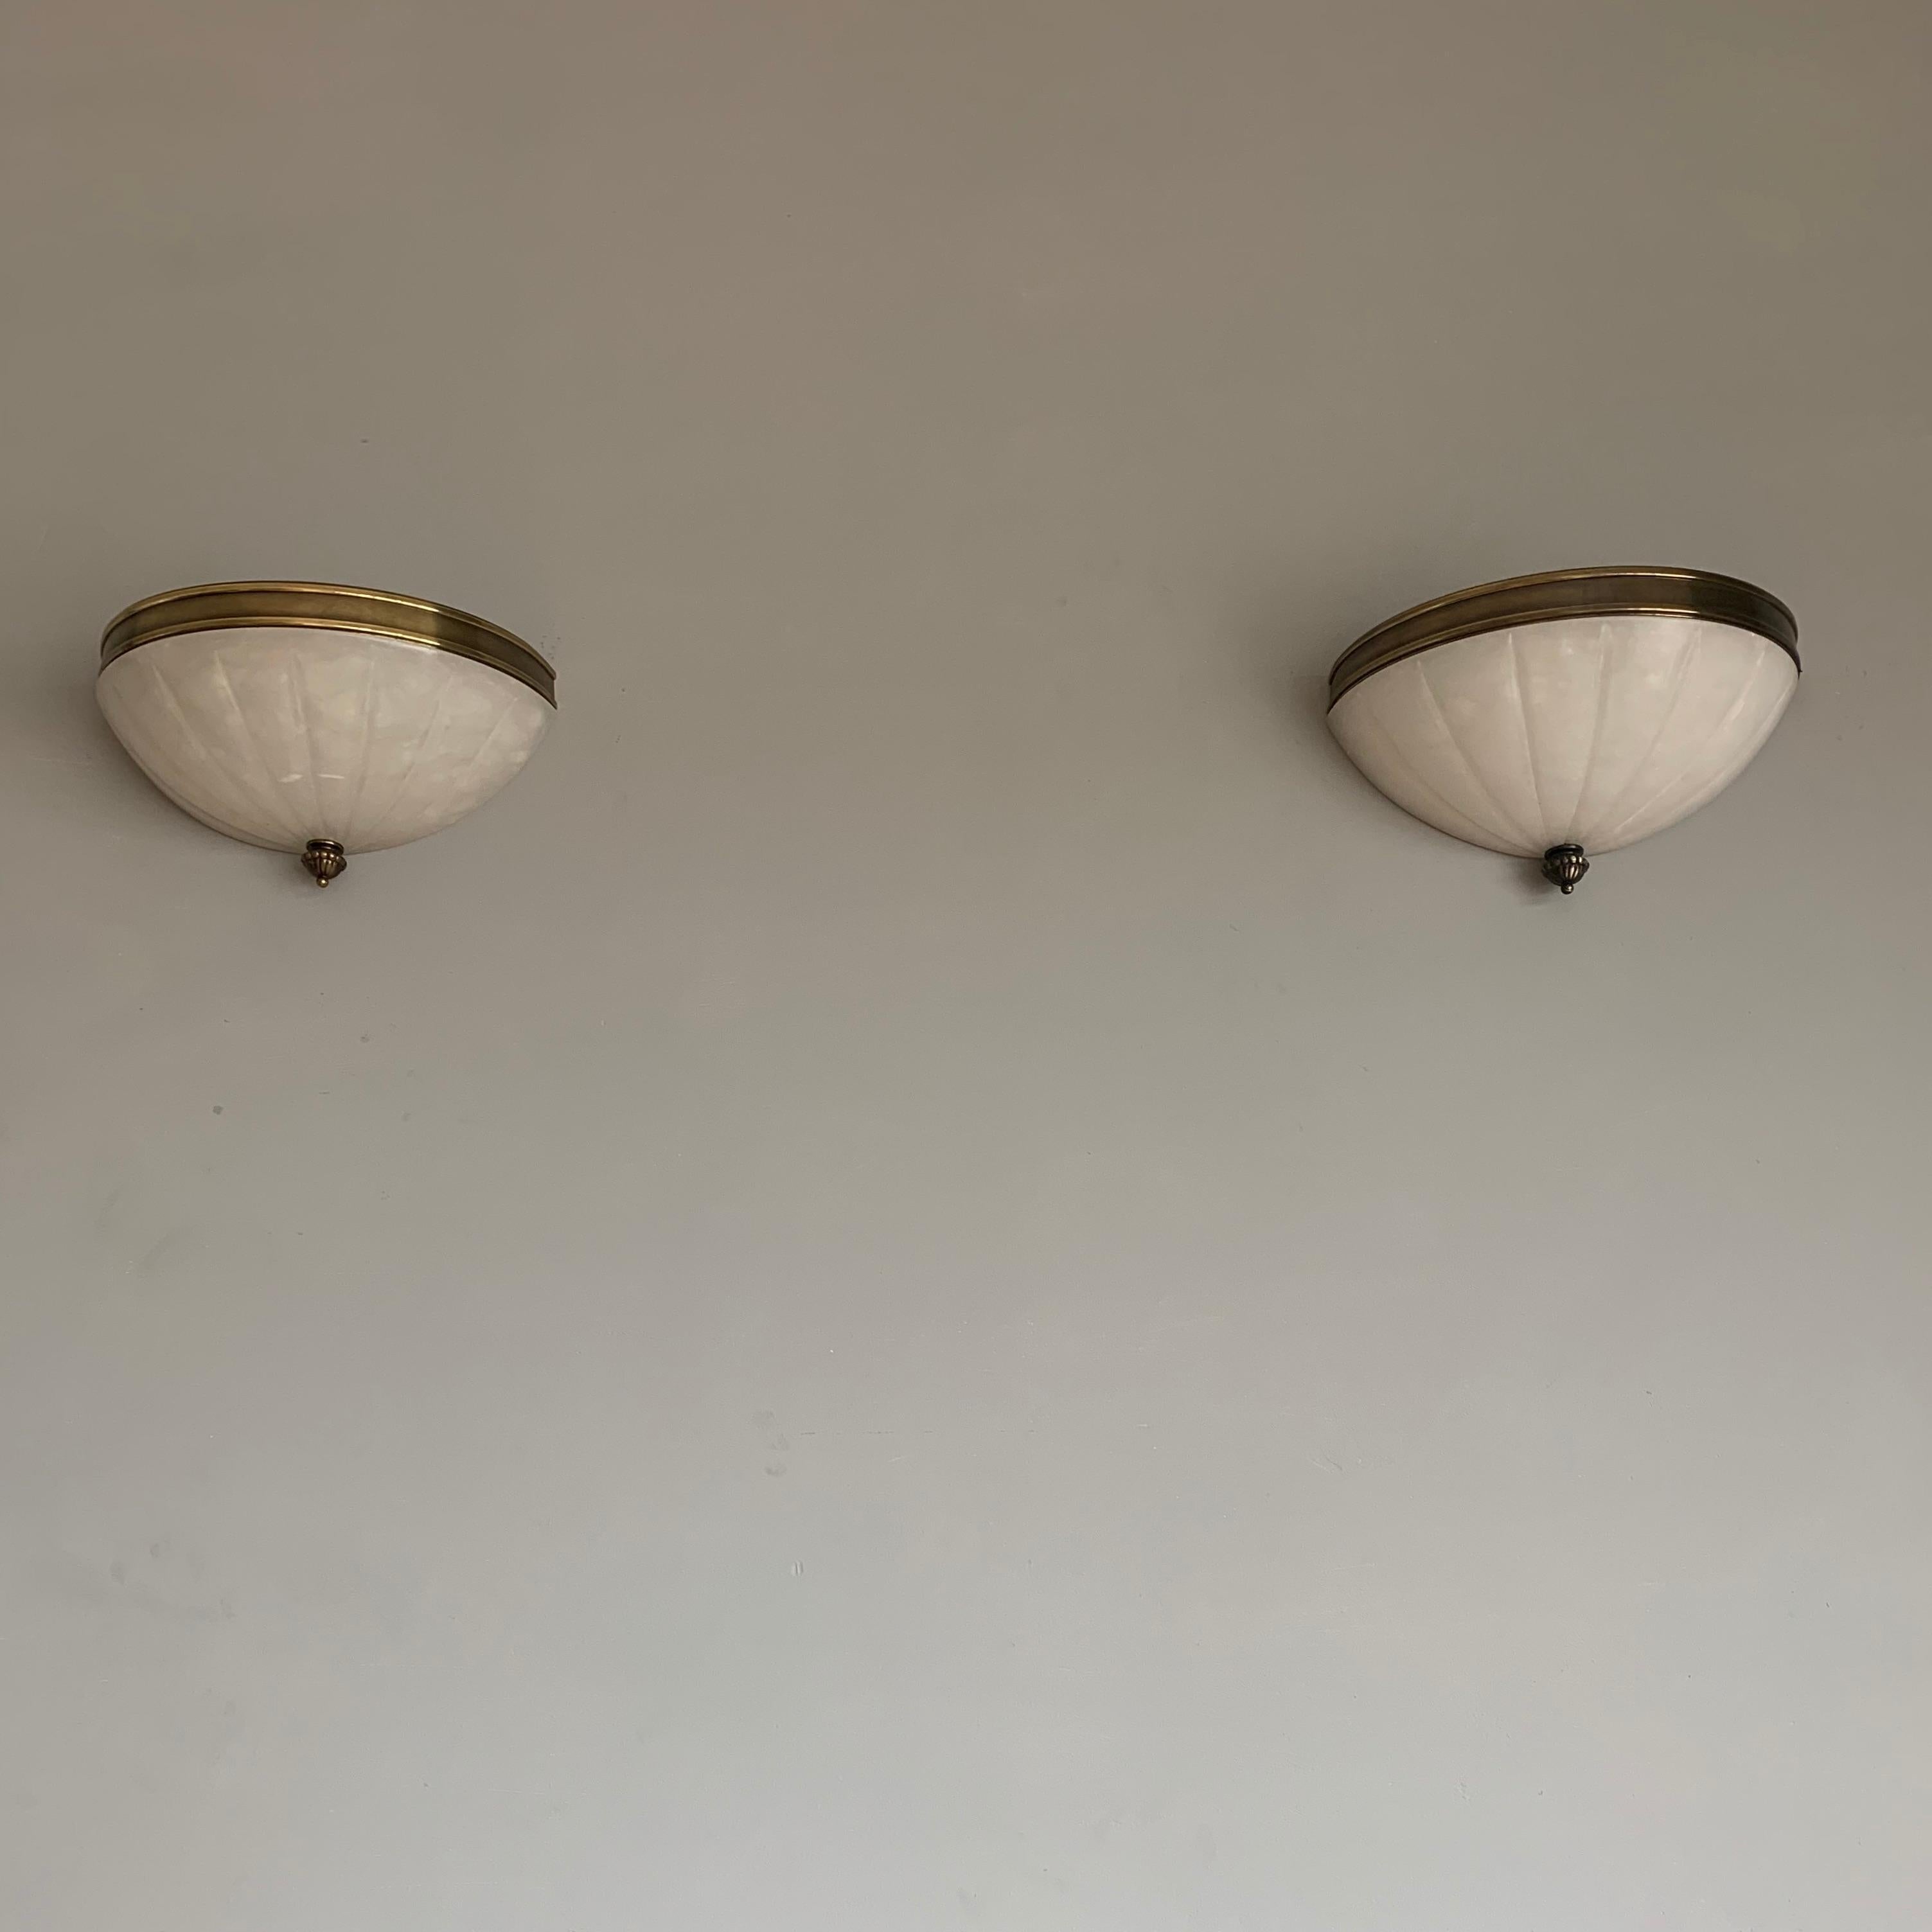 Rare Pair of Midcentury Modern, Alabaster & Brass Wall Sconces / Fixtures For Sale 4